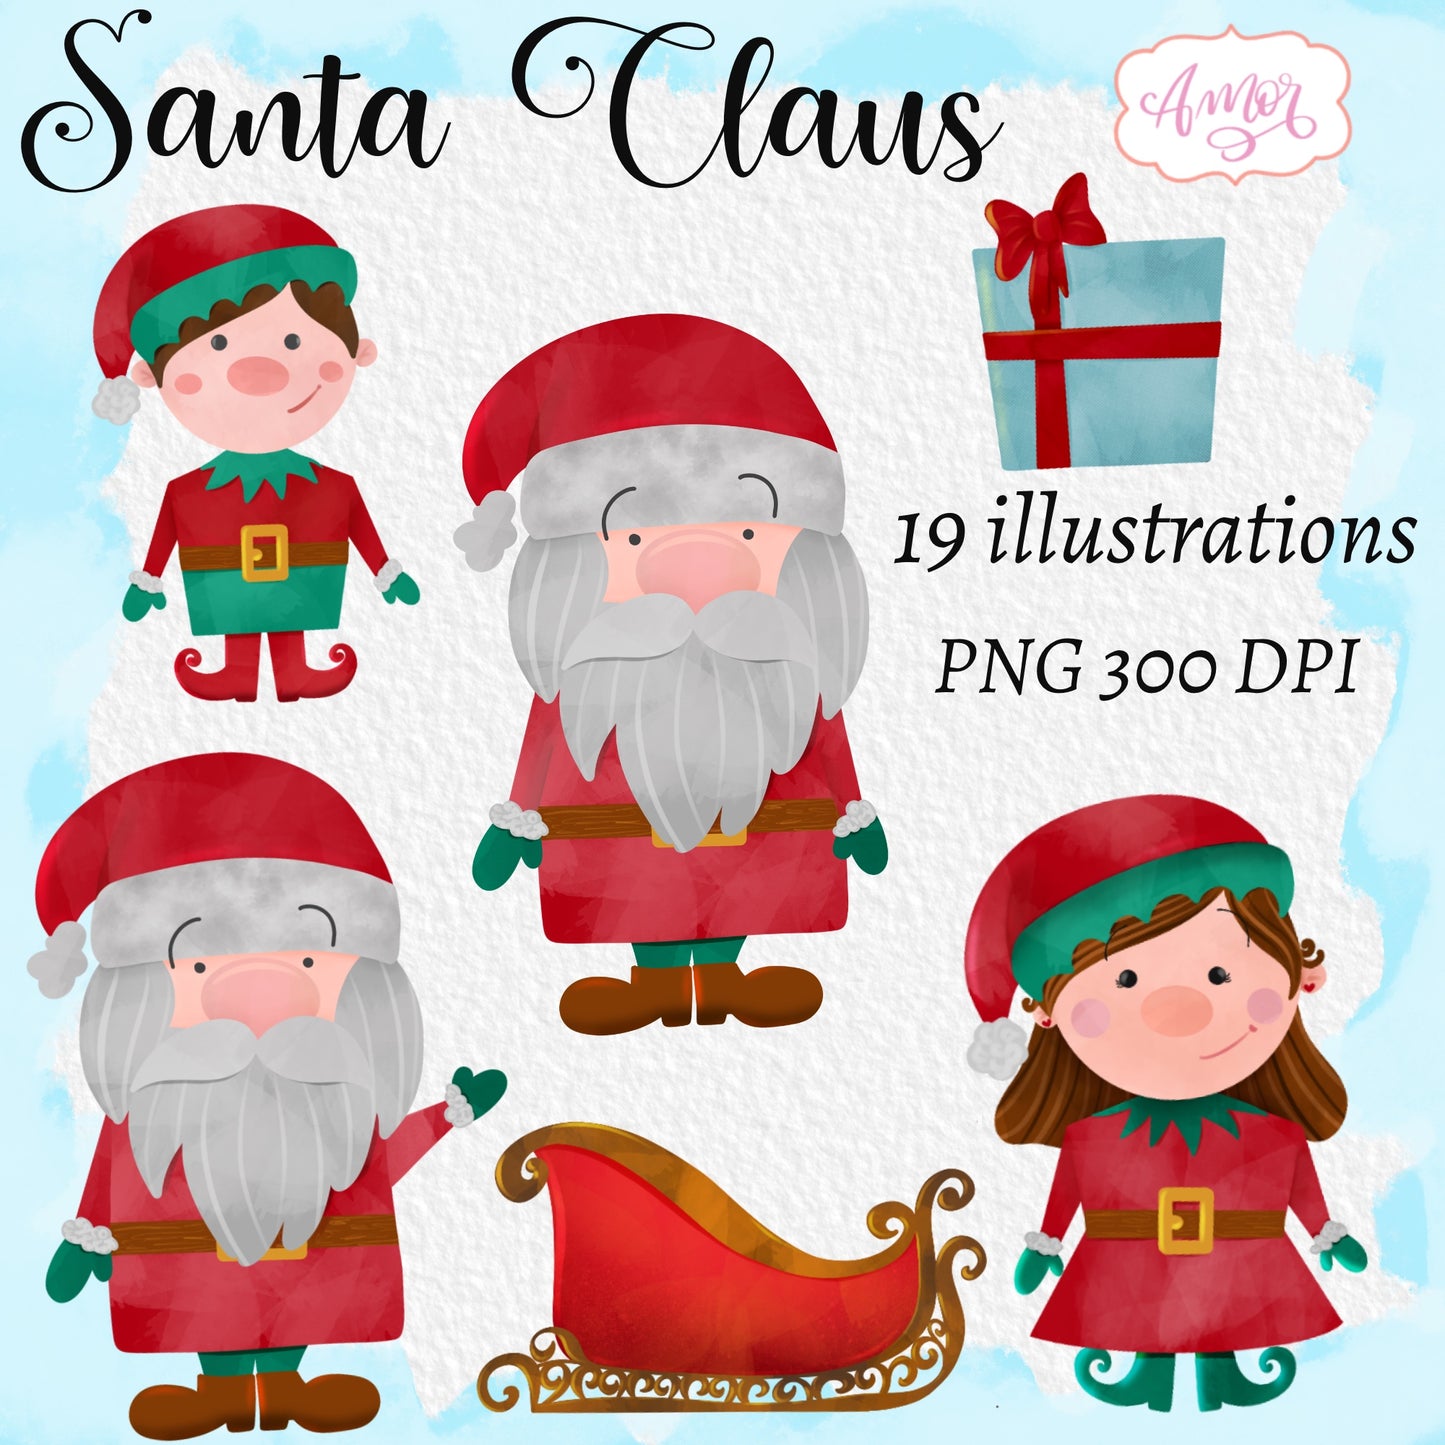 Santa Claus clipart with elves, gifts and a sleigh